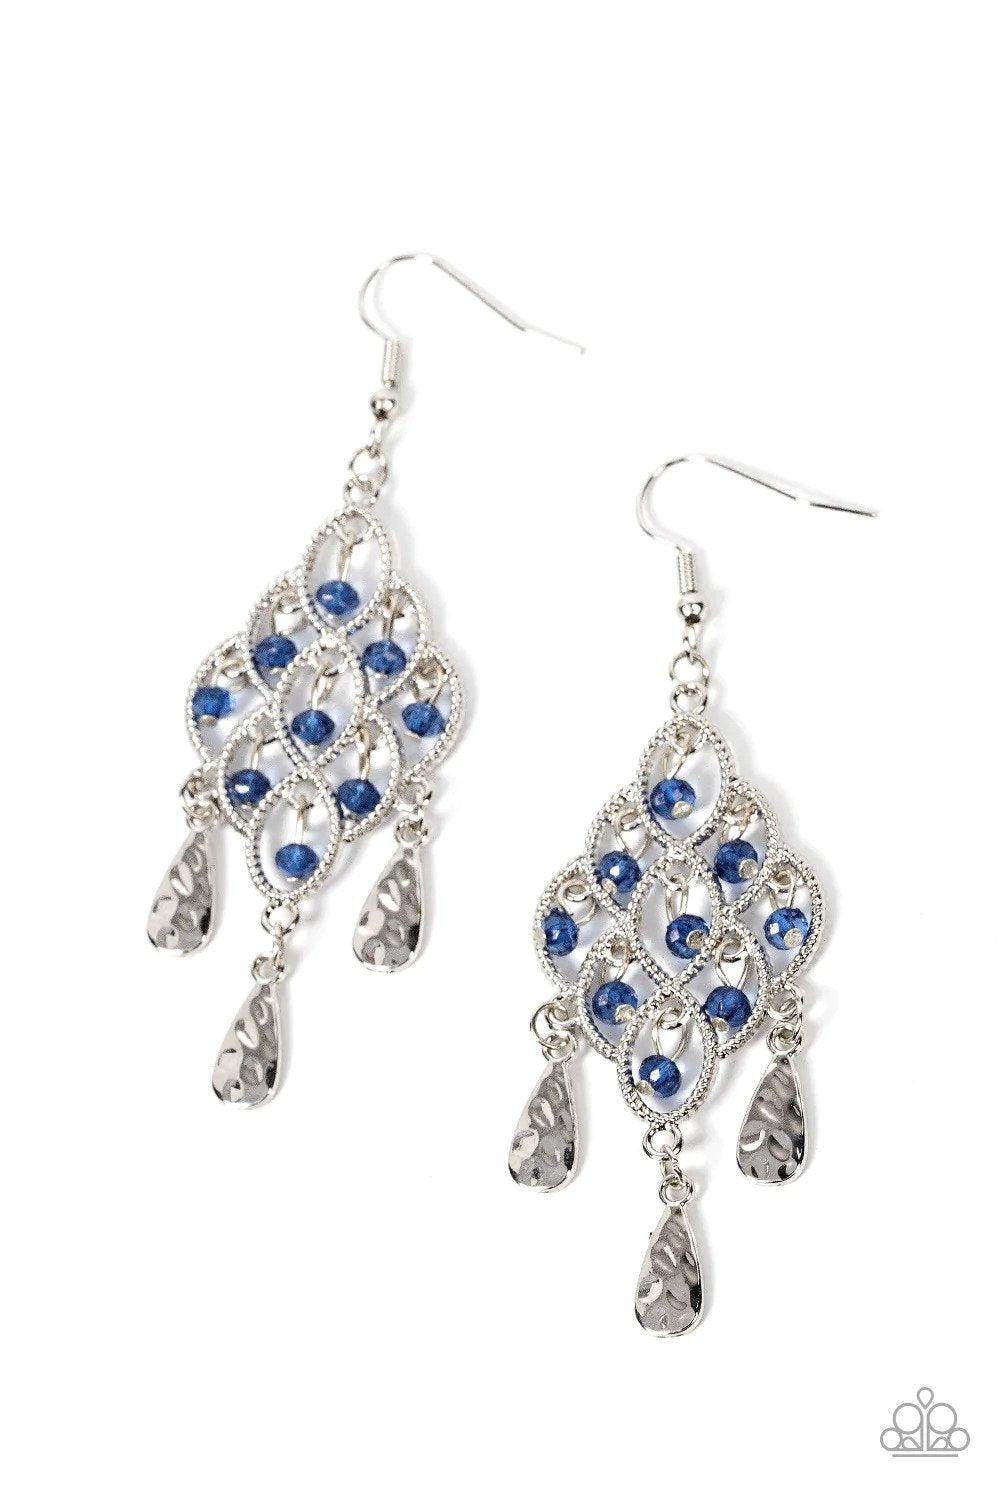 Sentimental Shimmer Blue Earrings - Paparazzi Accessories- lightbox - CarasShop.com - $5 Jewelry by Cara Jewels